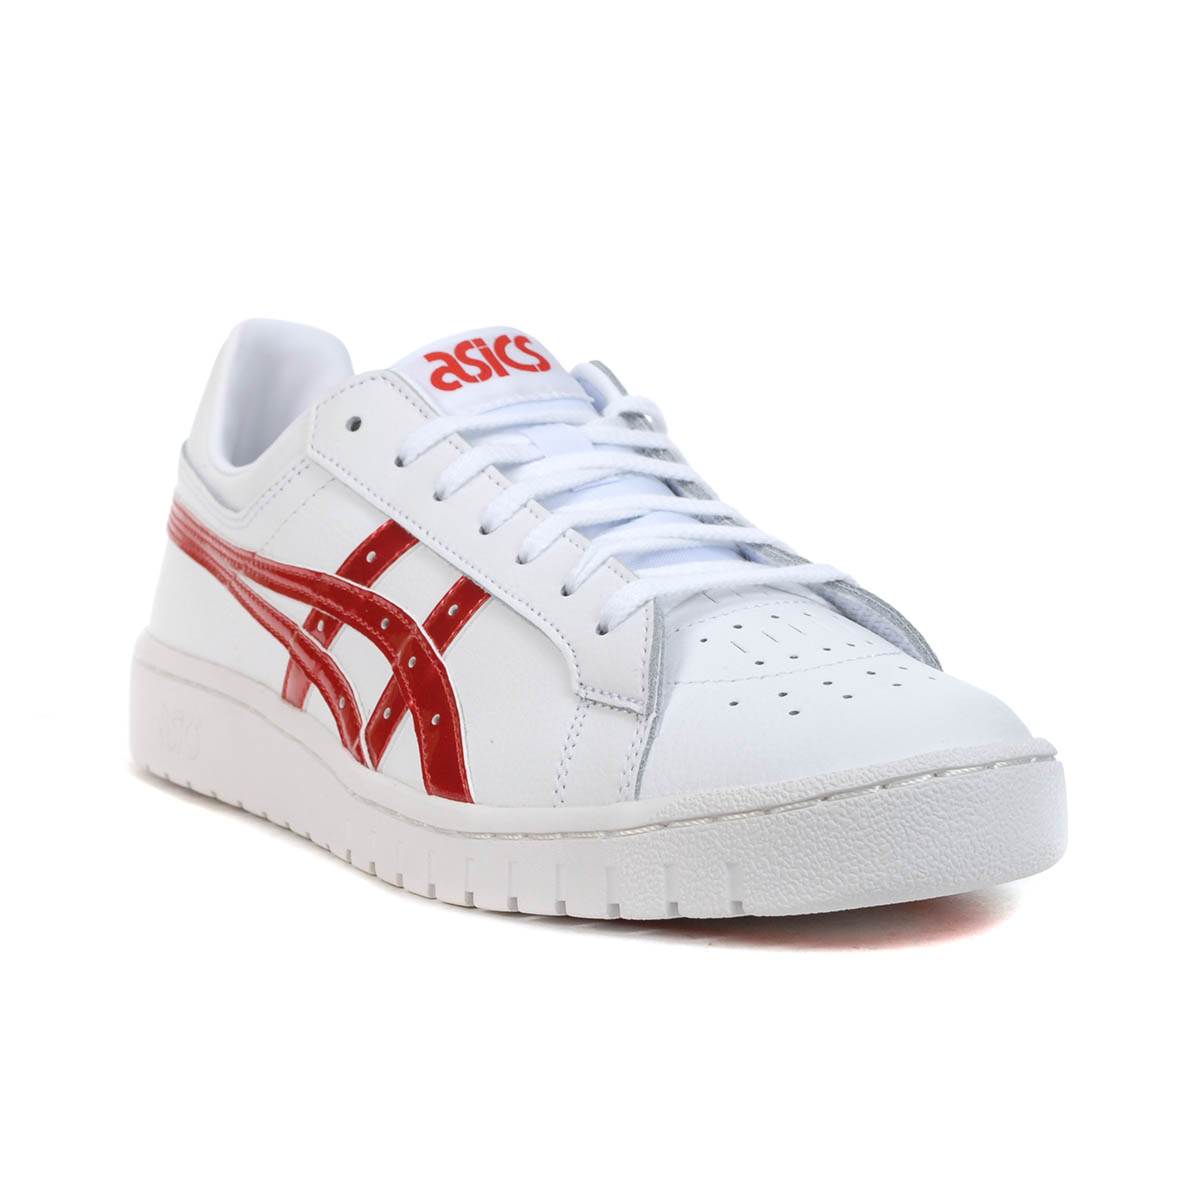 ASICS Men's Gel-PTG White/Classic Red Sneakers 1191A089.102